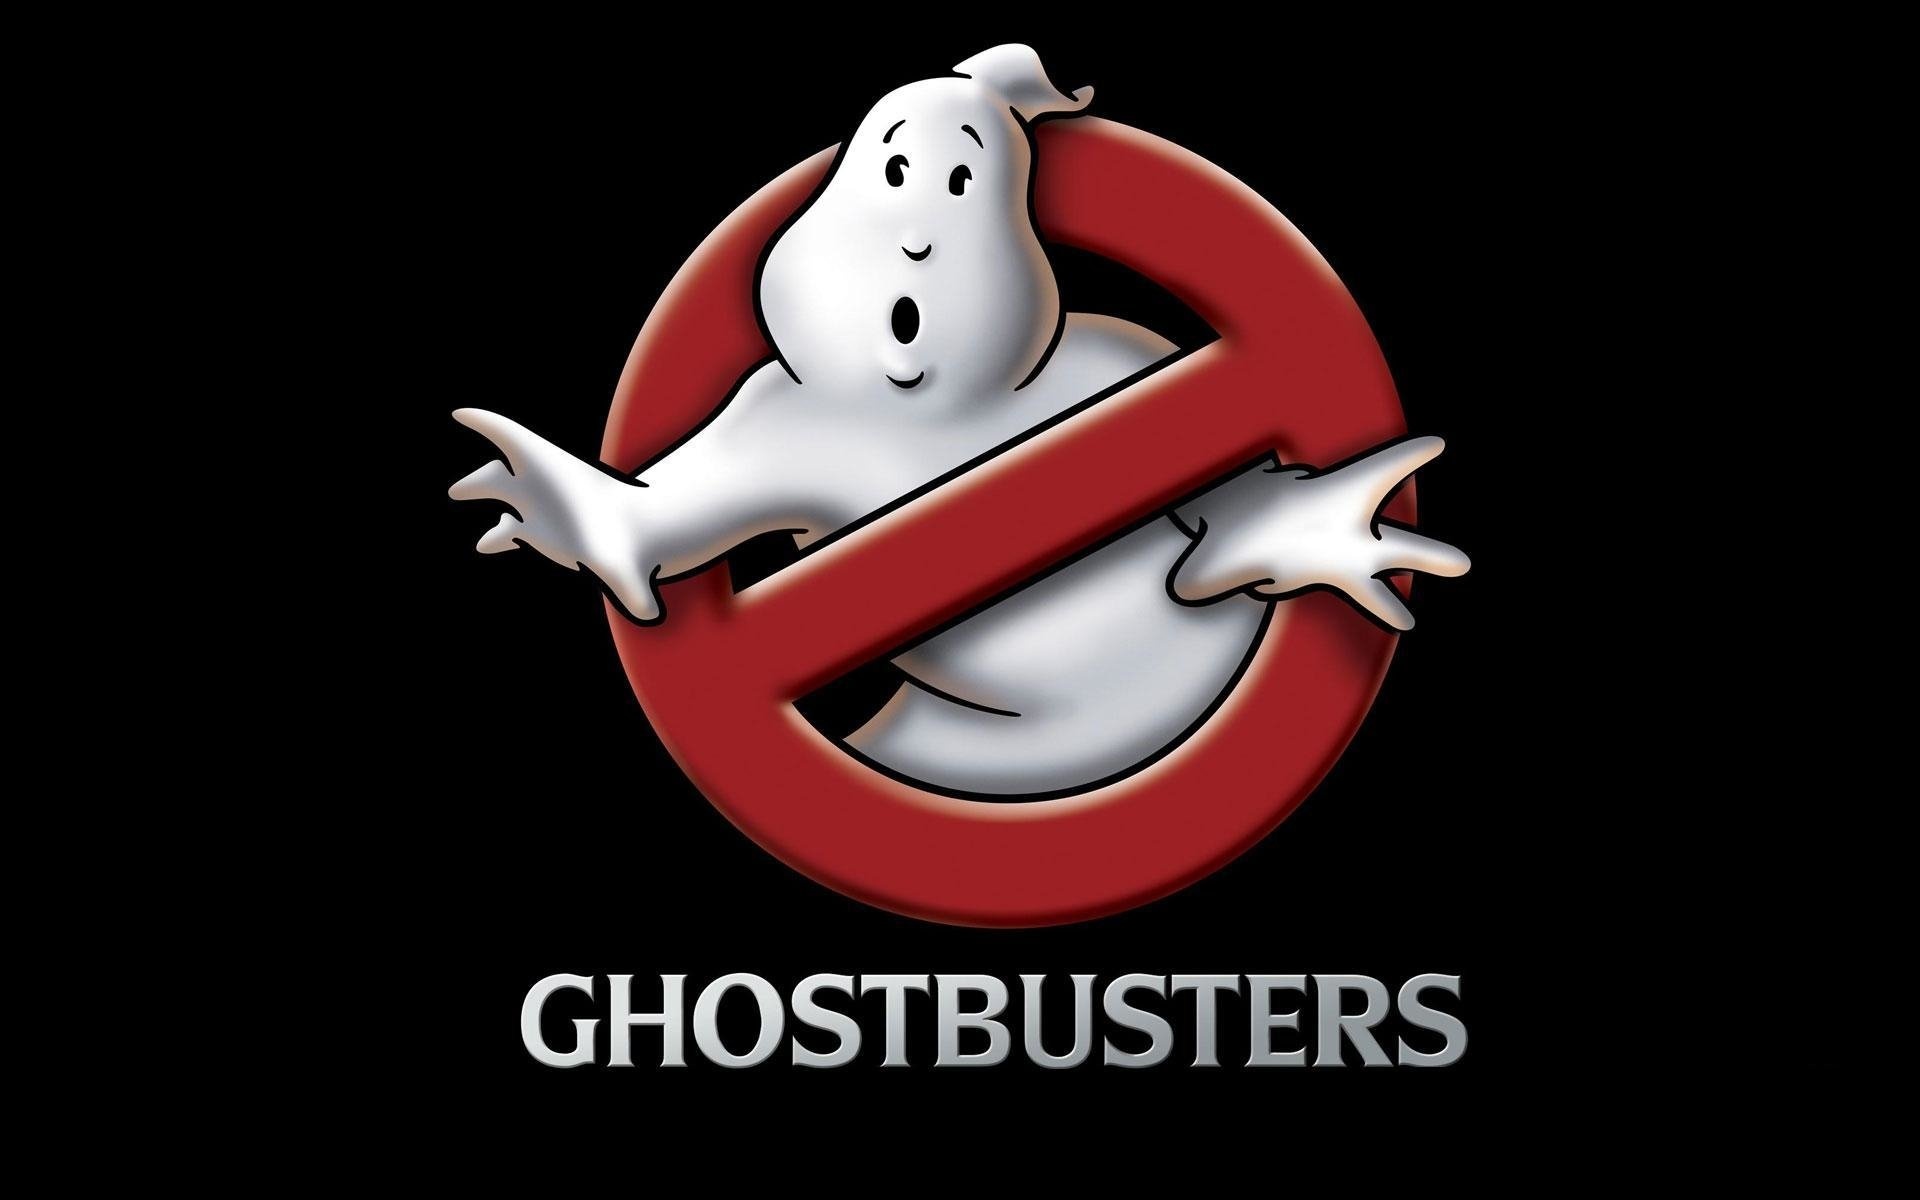 Ghostbusters: A 1989 American supernatural comedy film directed by Ivan Reitman and written by Dan Aykroyd and Harold Ramis. 1920x1200 HD Background.